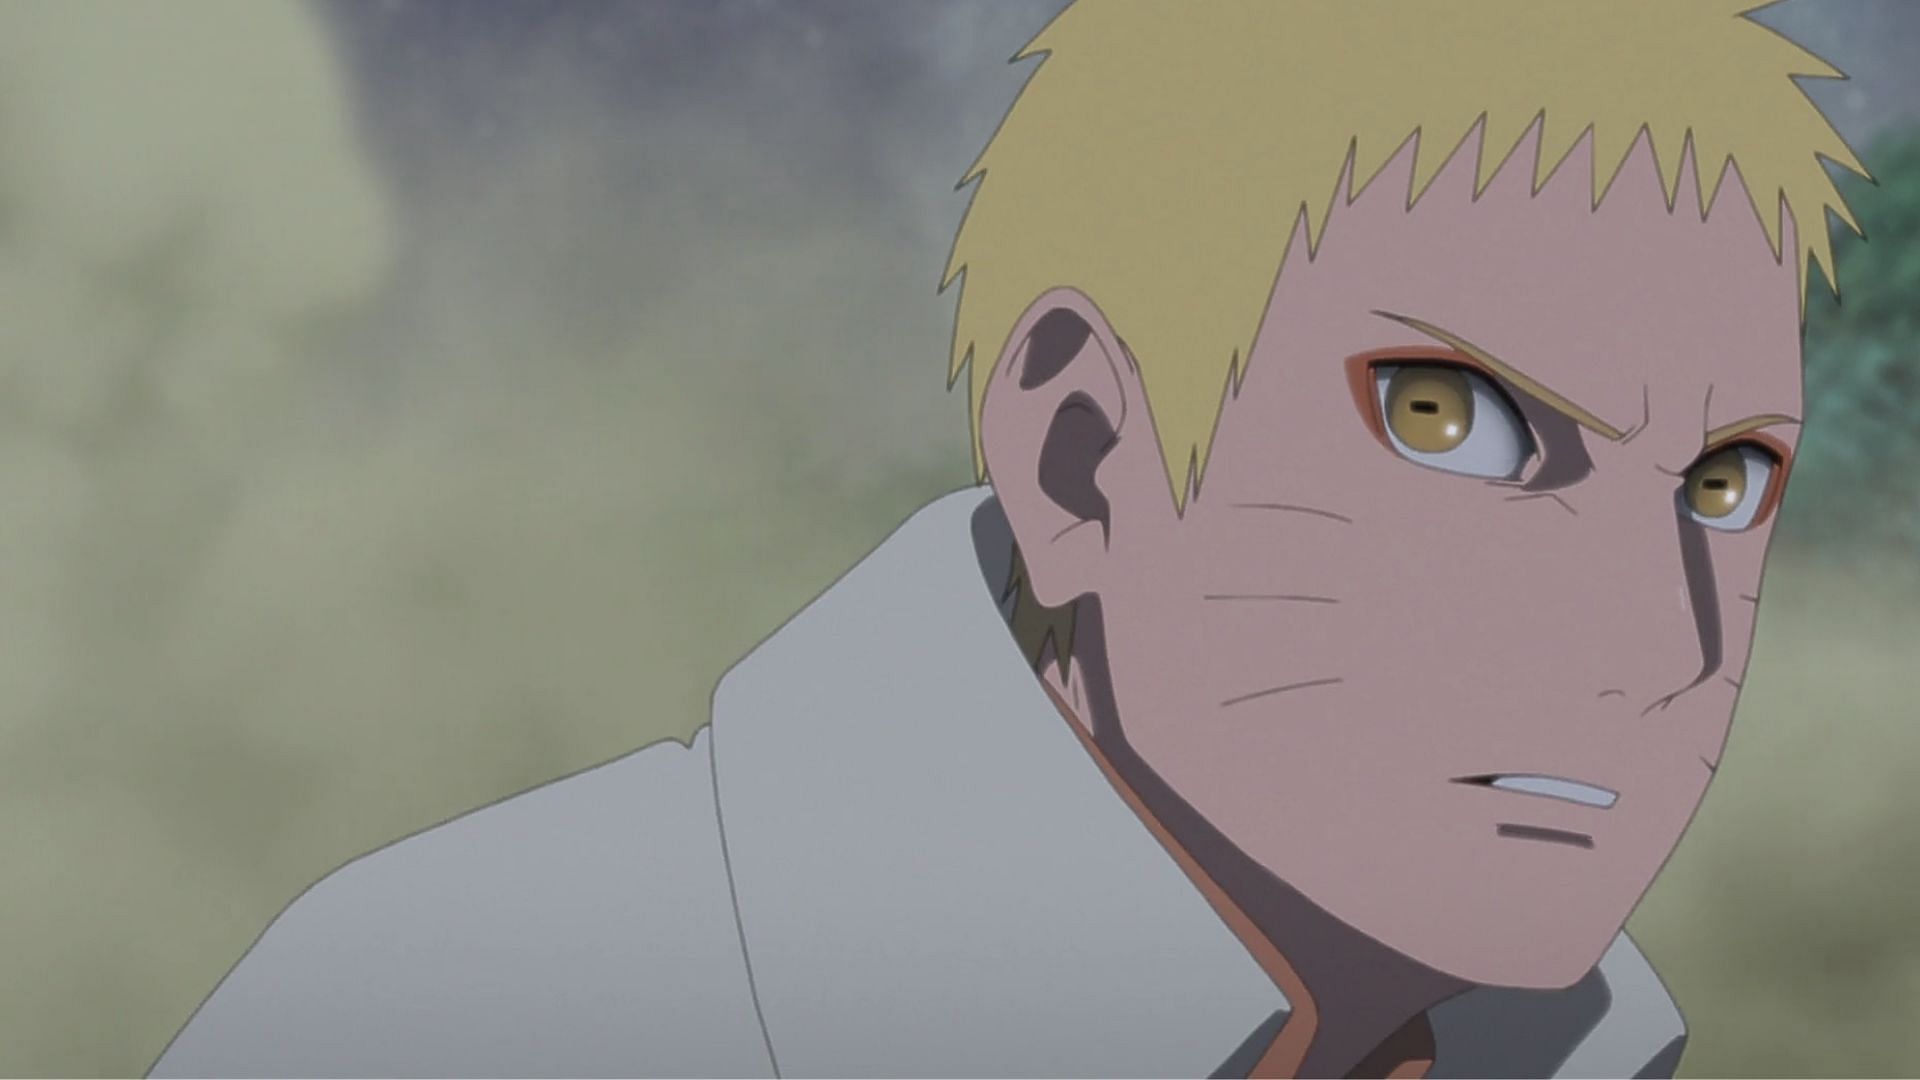 BORUTO EPISODE 291 - Naruto Returns to Battle for the First Time